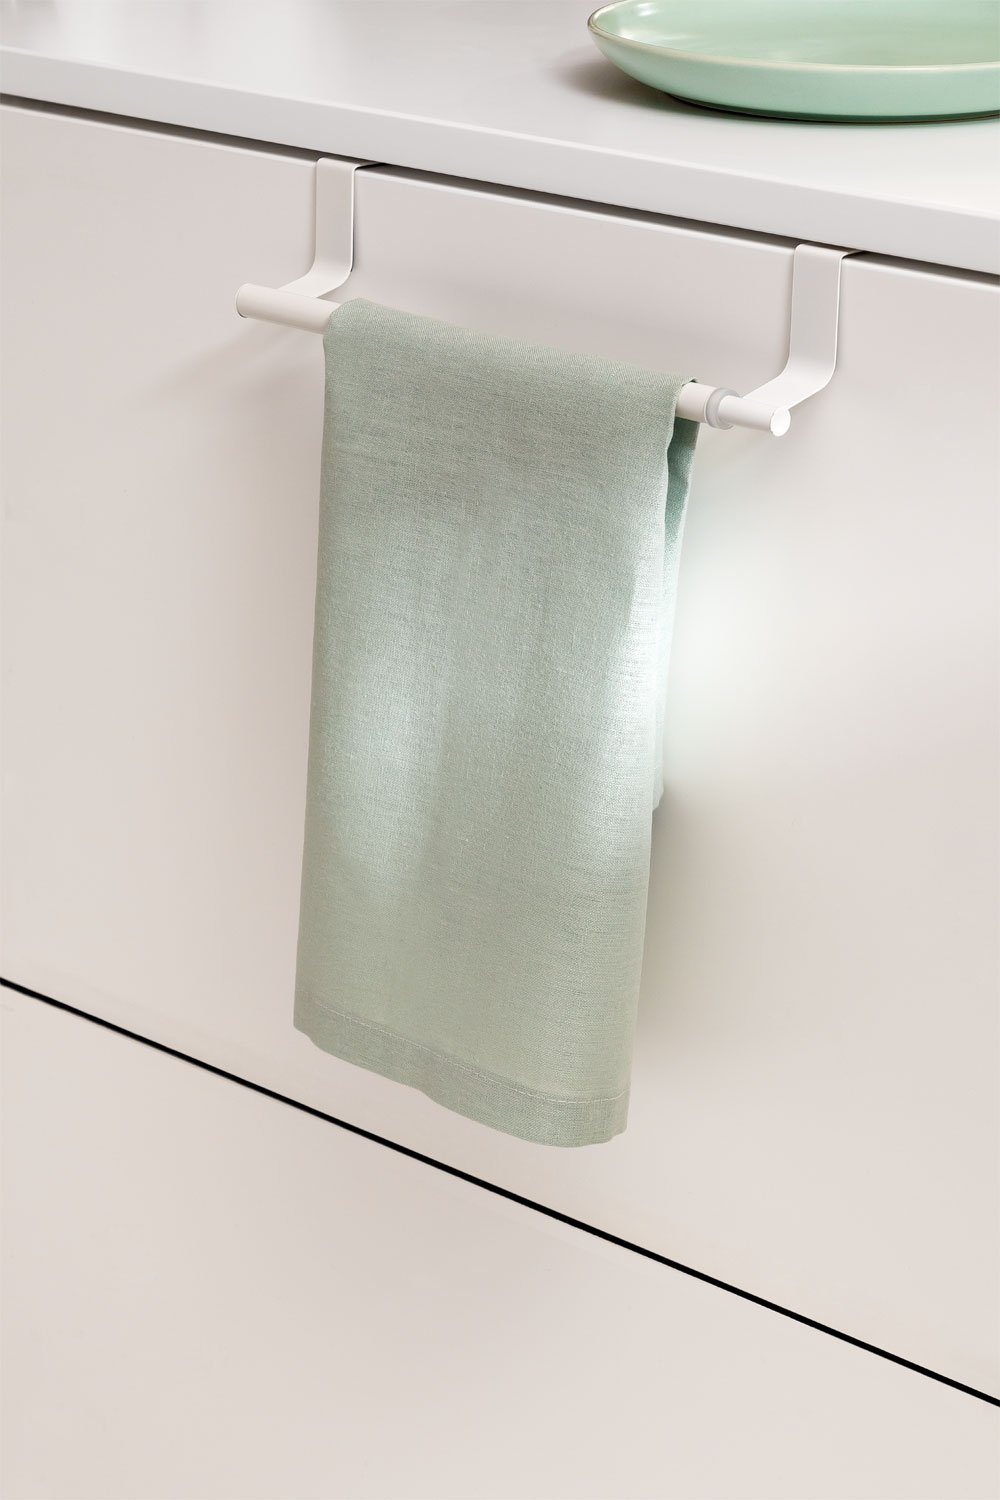 Extendable Holder for Kitchen Towels Olvena, gallery image 1